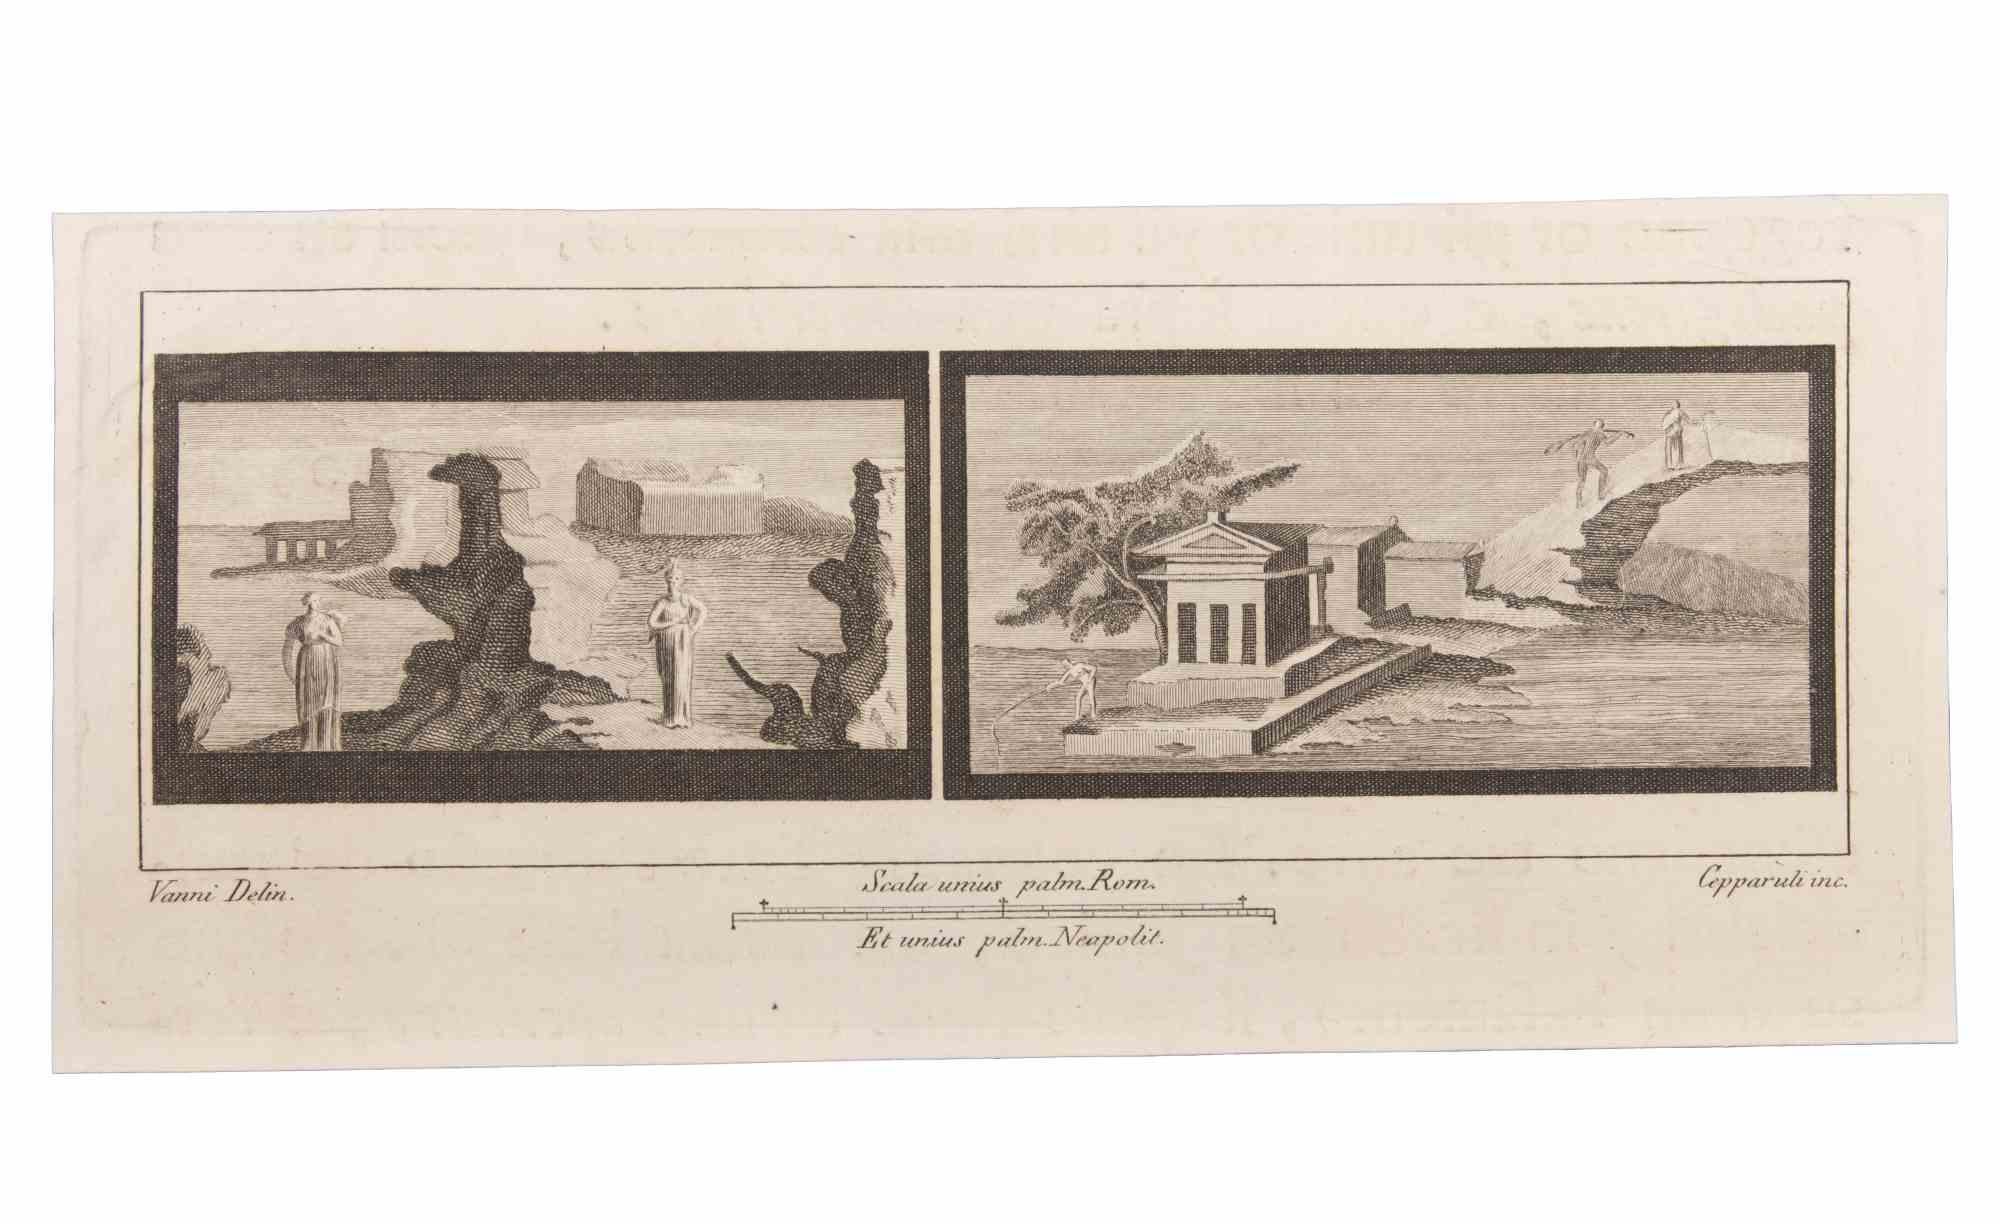 Francesco Cepparuli Figurative Print - Seascape with Monument and Figures - Etching by F. Cepparuli - 18th Century